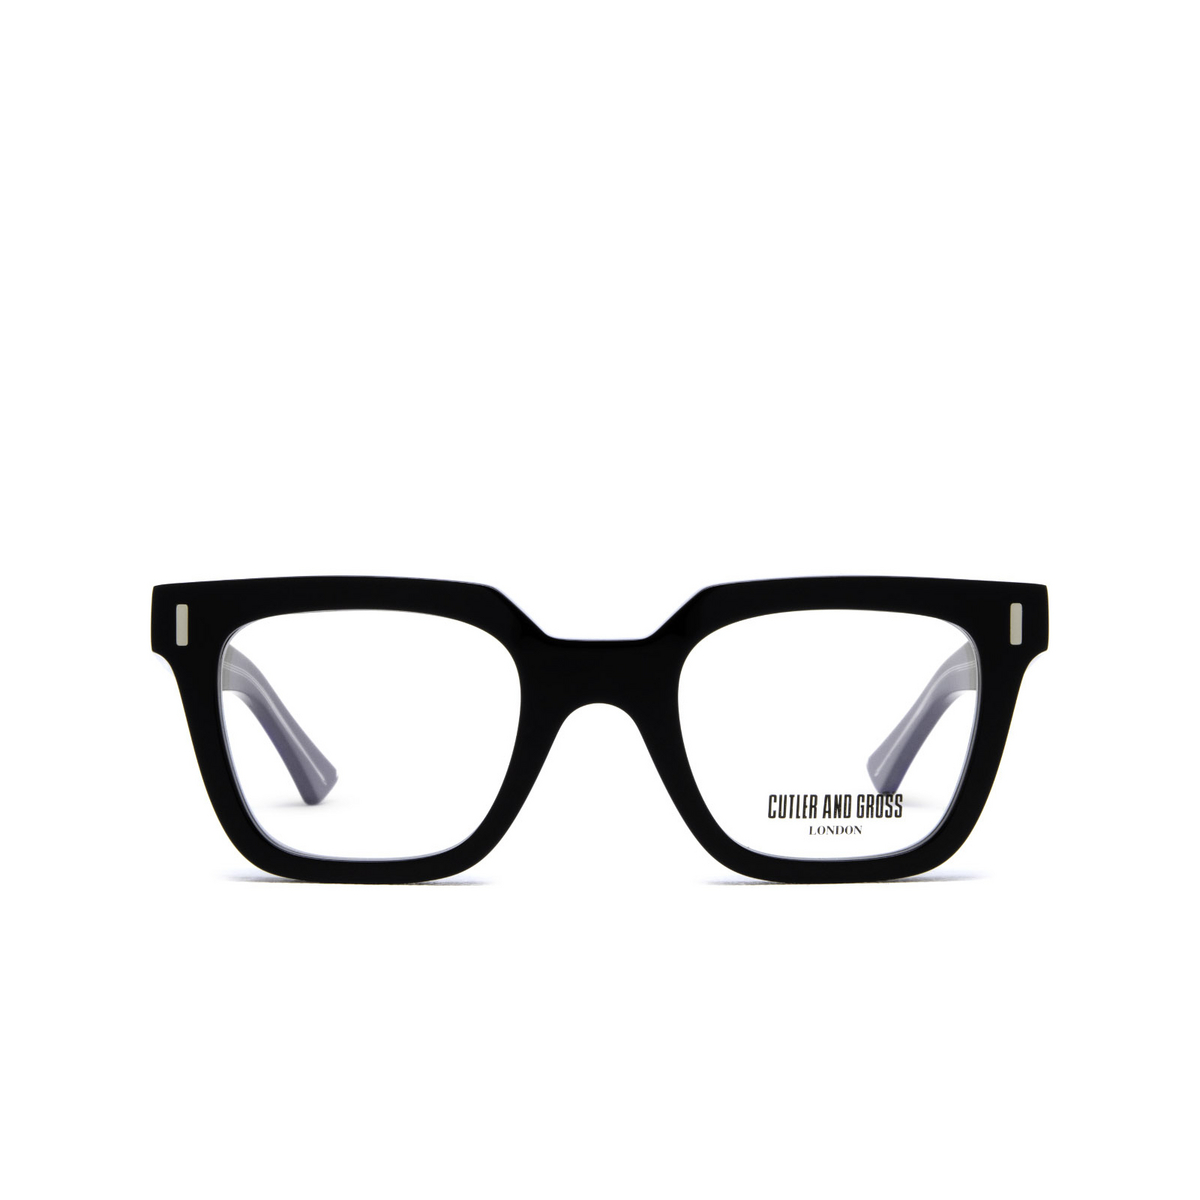 Cutler and Gross 1305 Eyeglasses 01 Black - front view